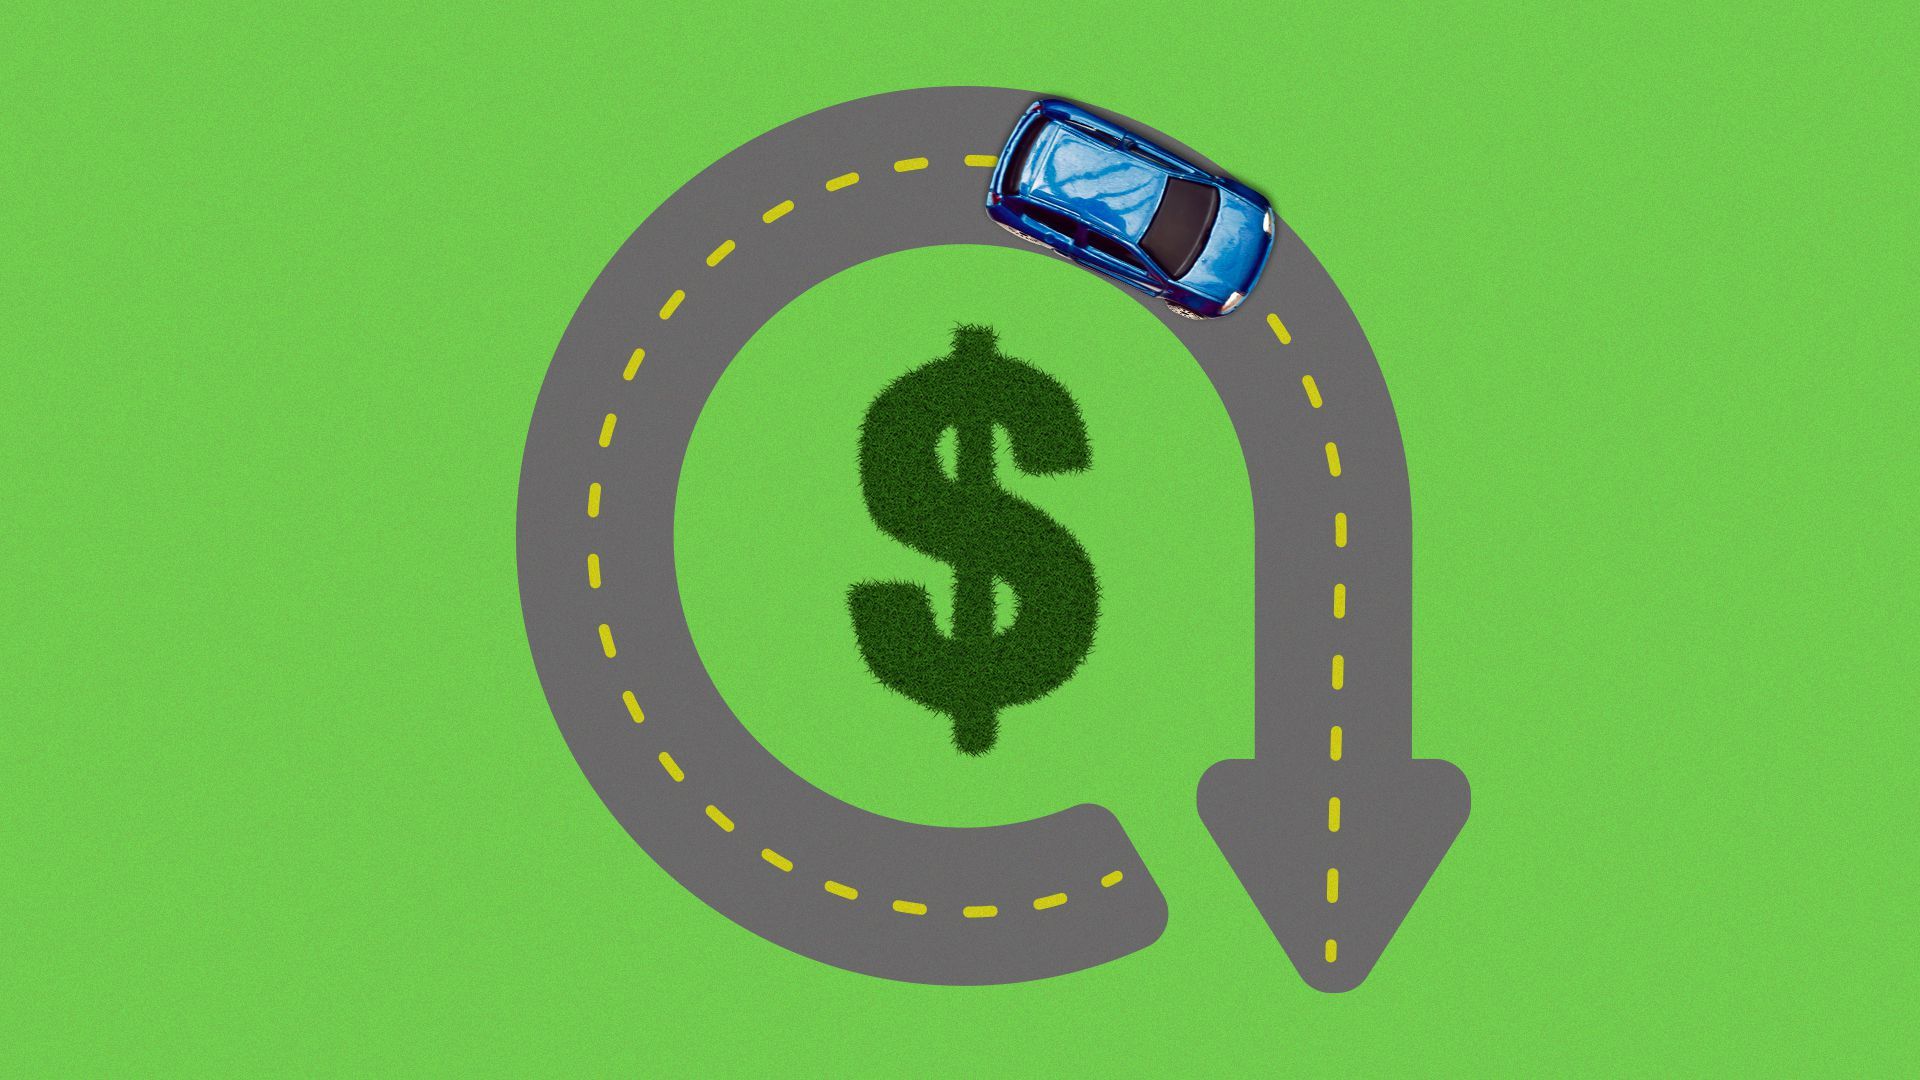 Illustration of a lower prices icon comprised of a road circling a patch of grass that is in the shape of a dollar sign.